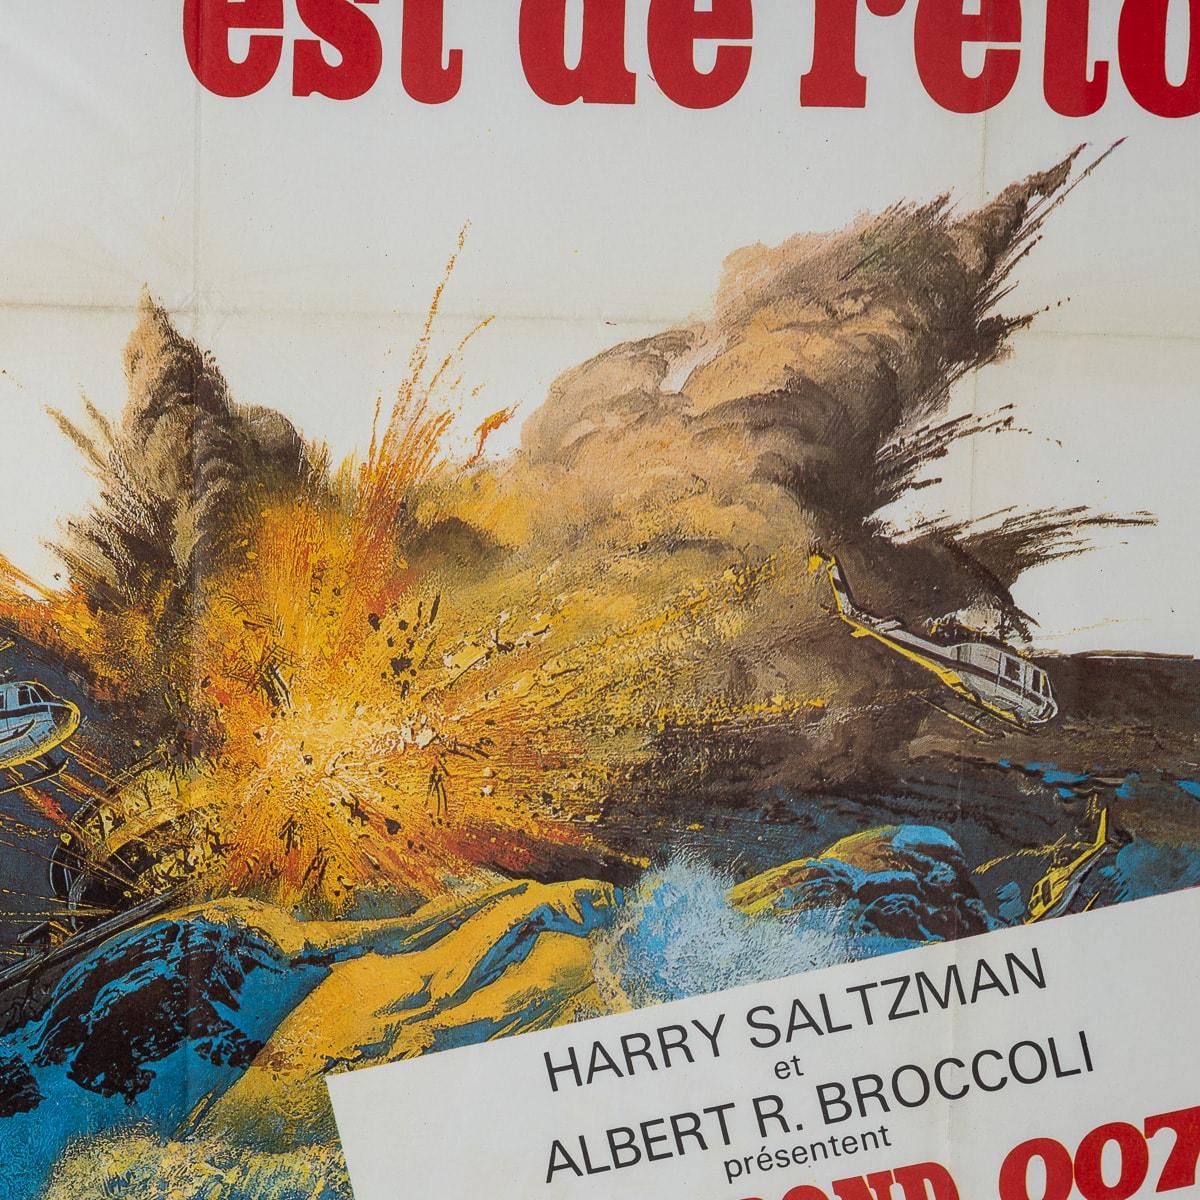 French Release James Bond 007 'On Her Majesty's Secret Service' Poster c.1969 For Sale 5